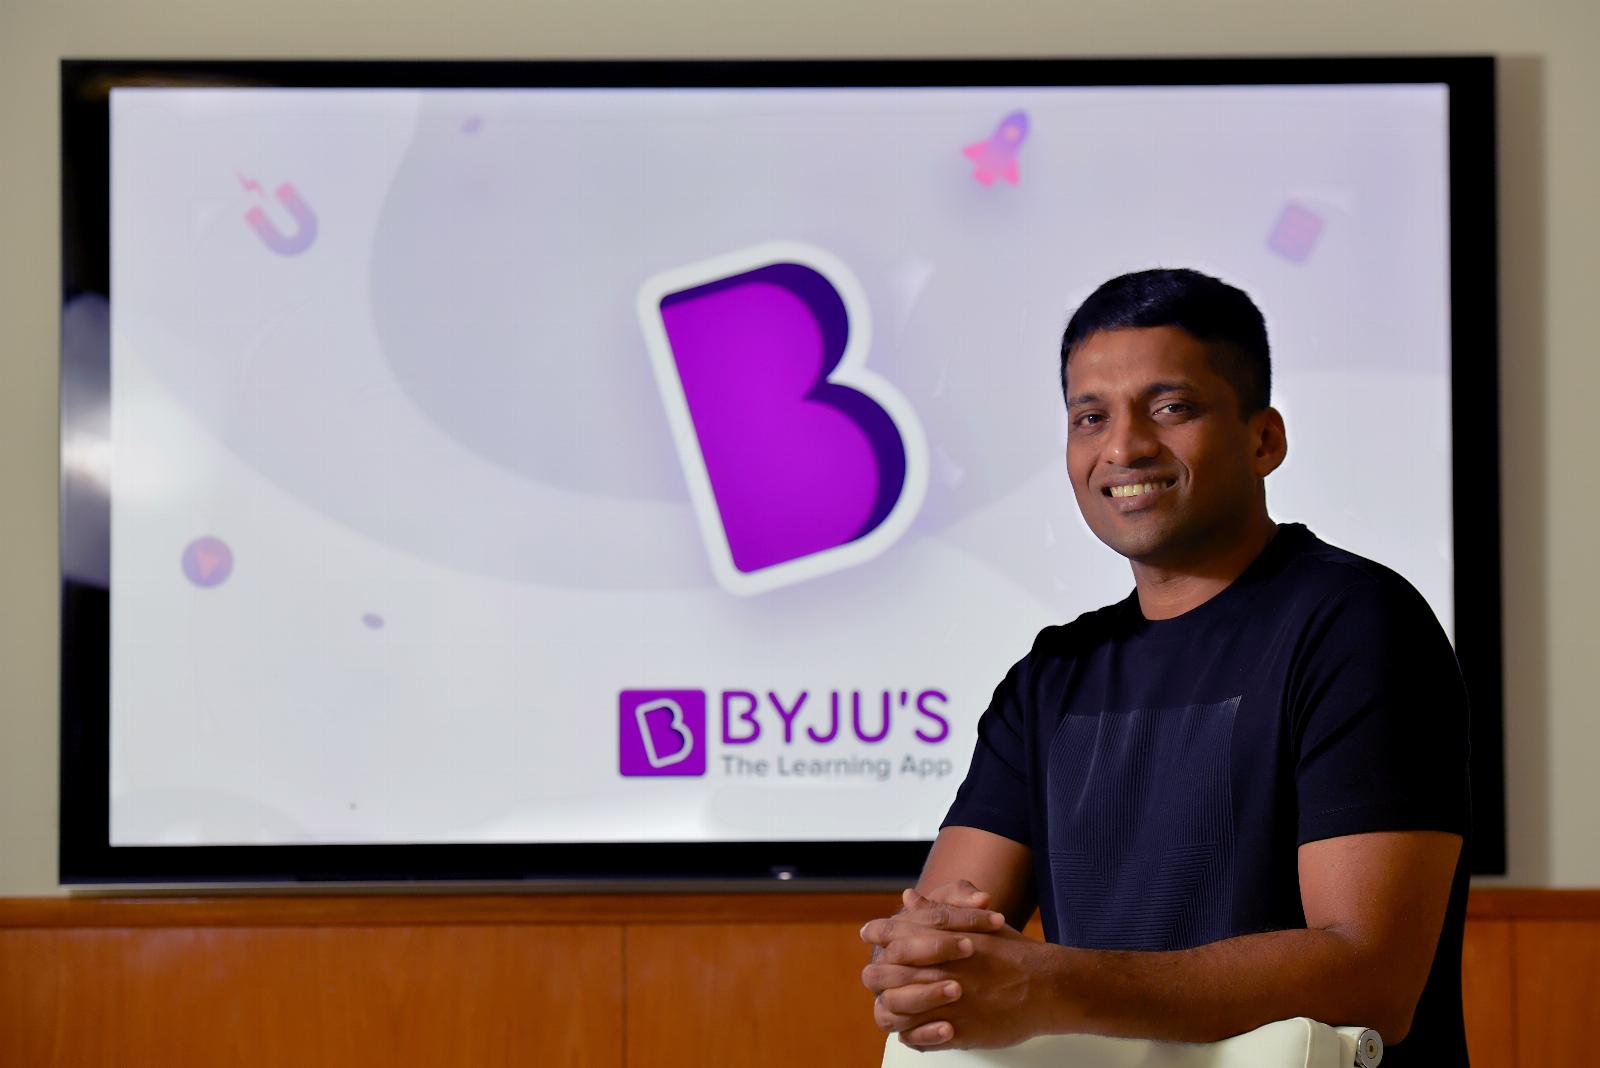 India ordered an investigation into Byju’s days before auditor and board members resigned, report says